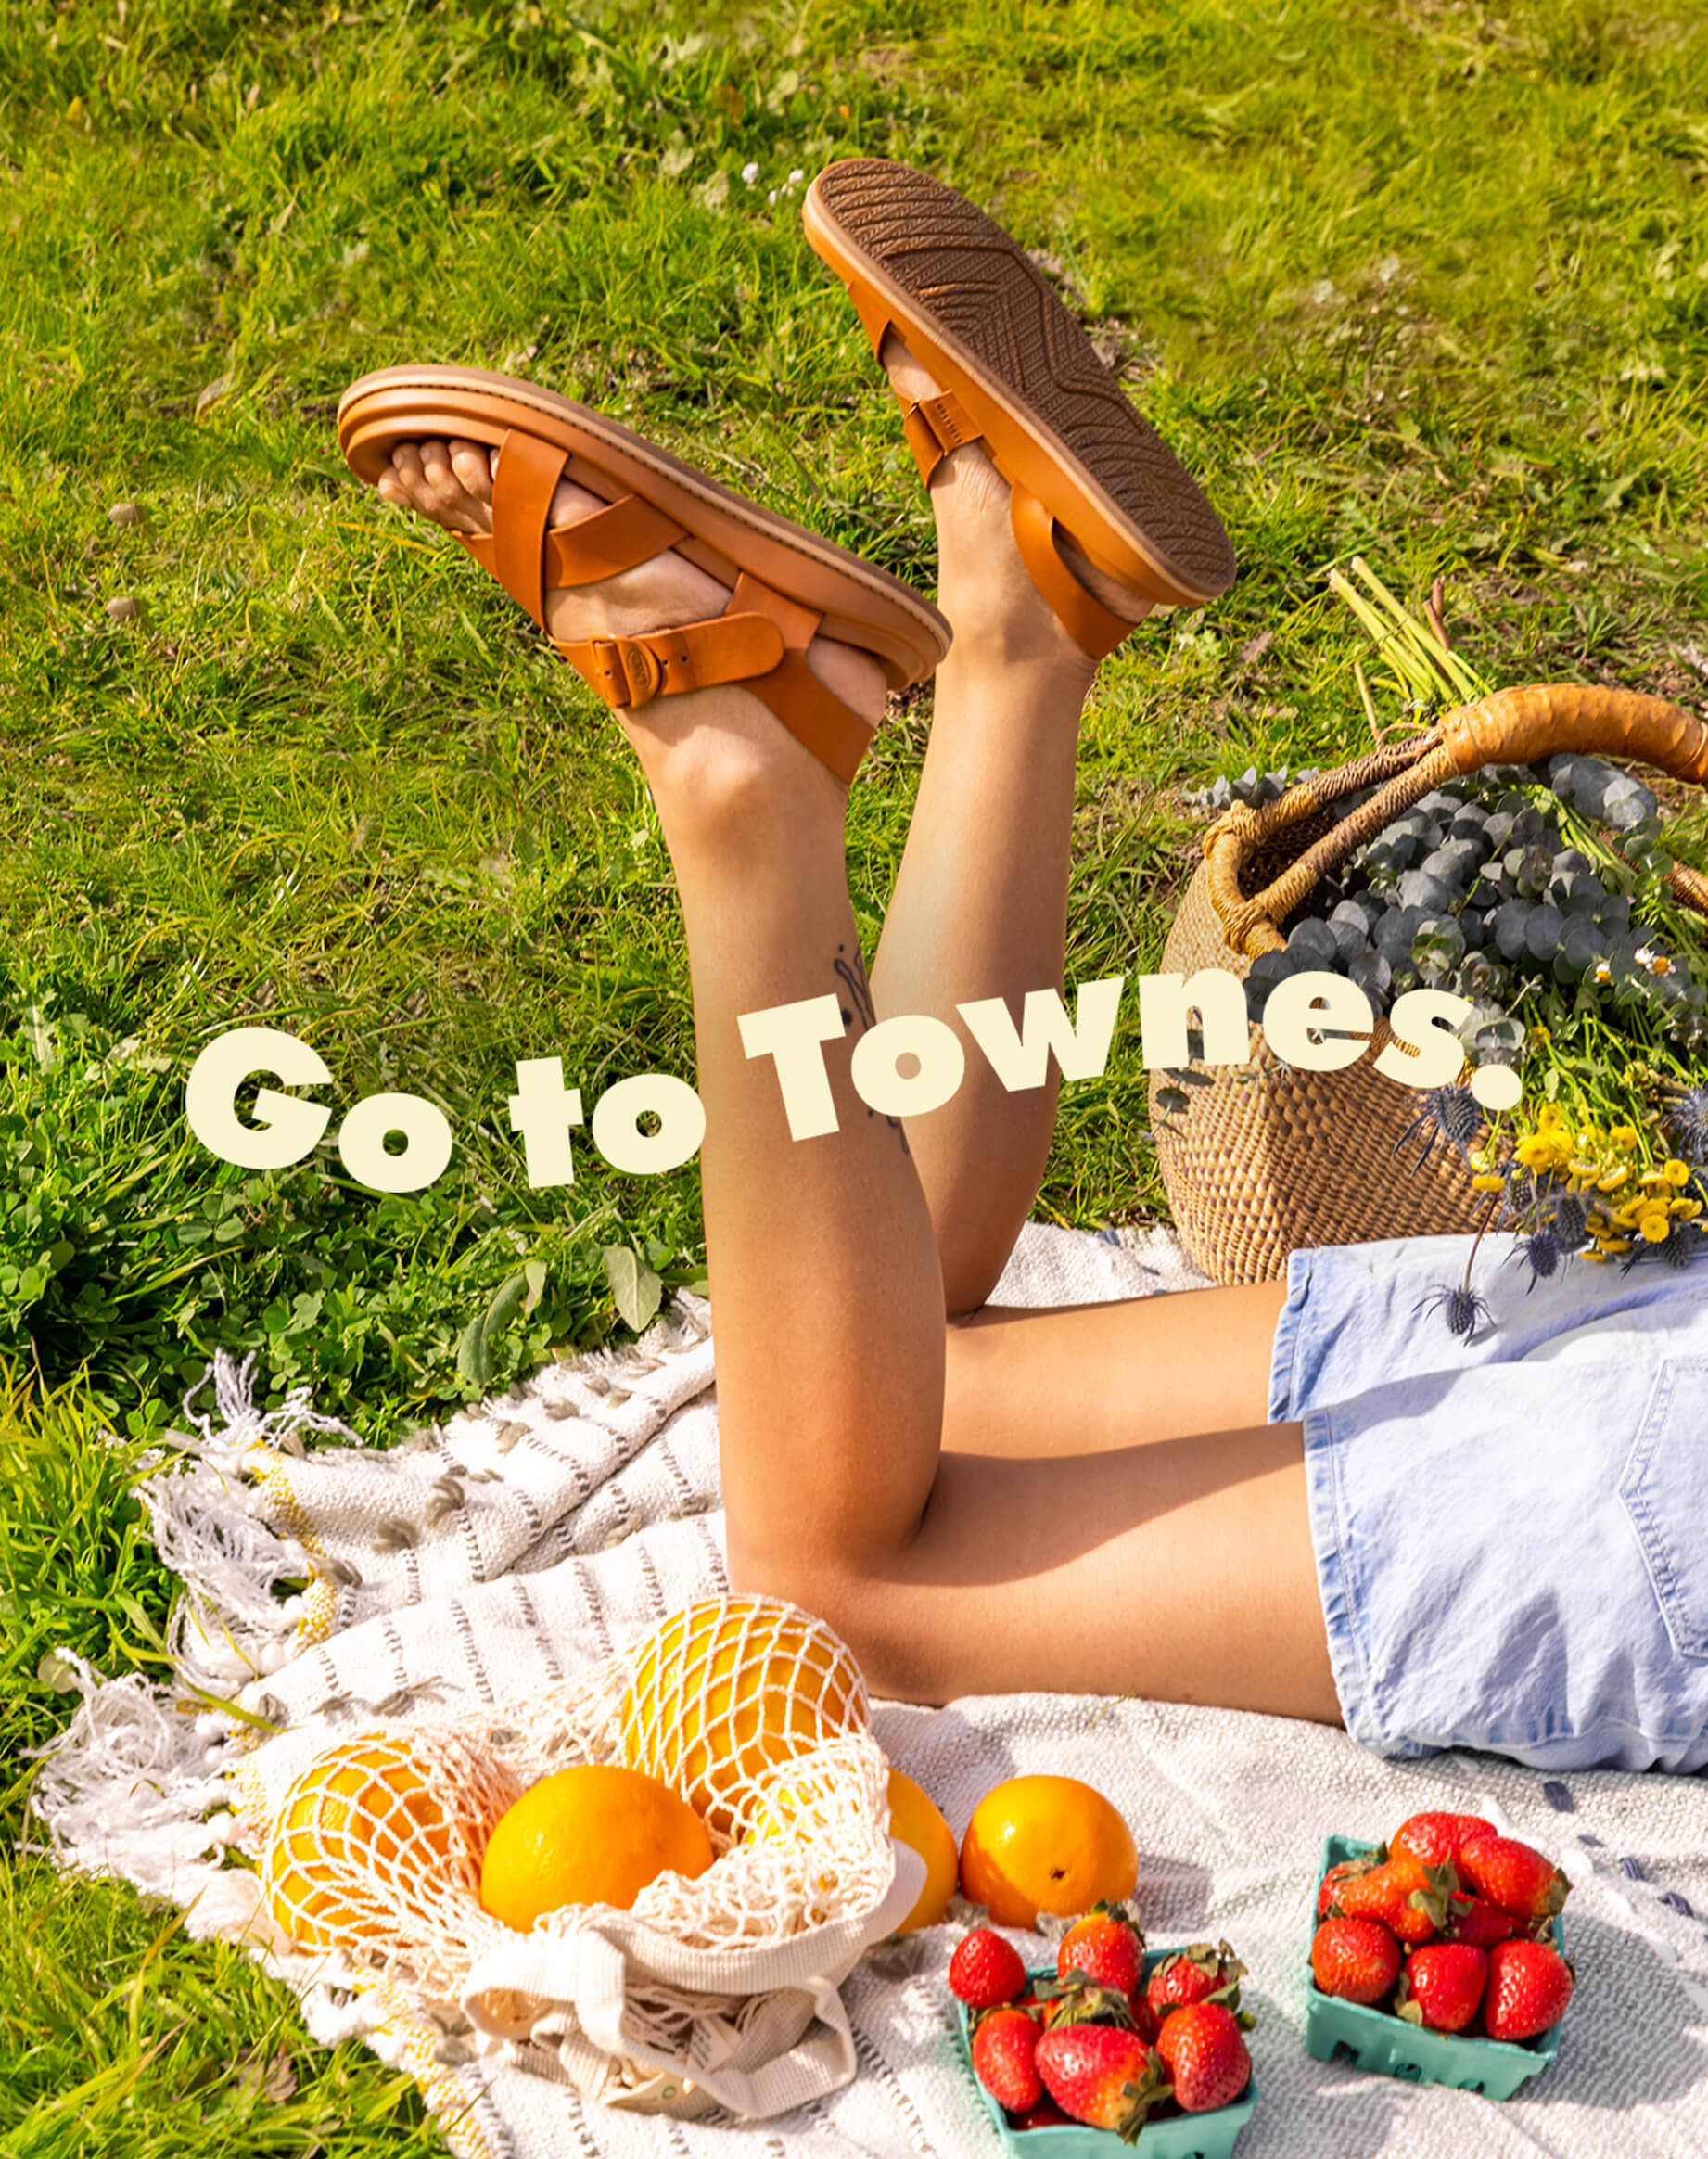 Person enjoying a picnic while wearing a pair of Townes sandals.